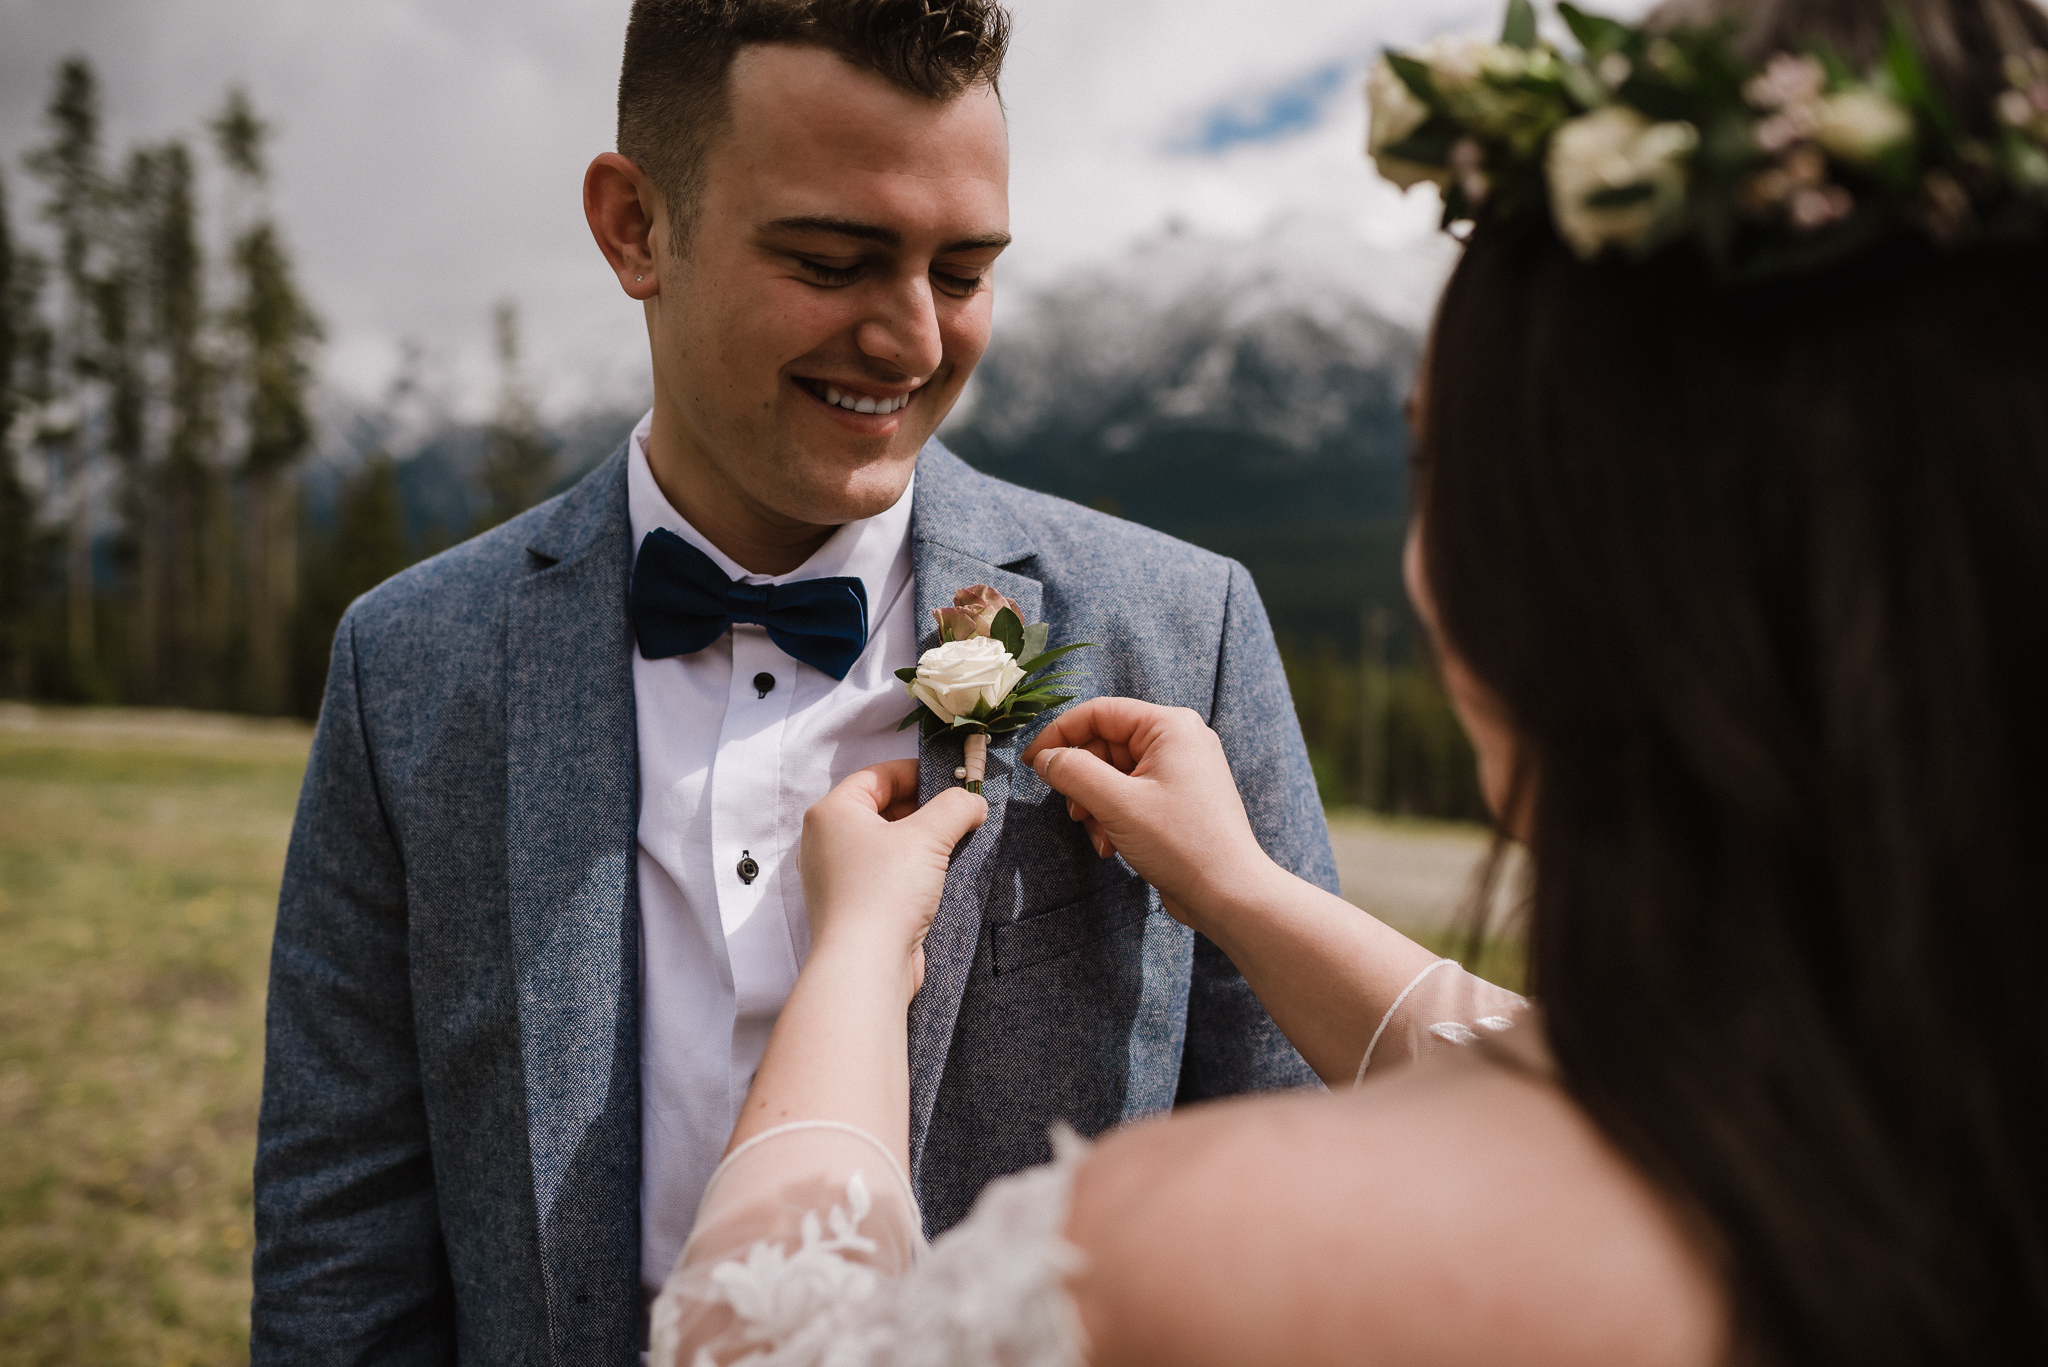 Bride pinning the corsage on groom at Nordic Center, Canmore